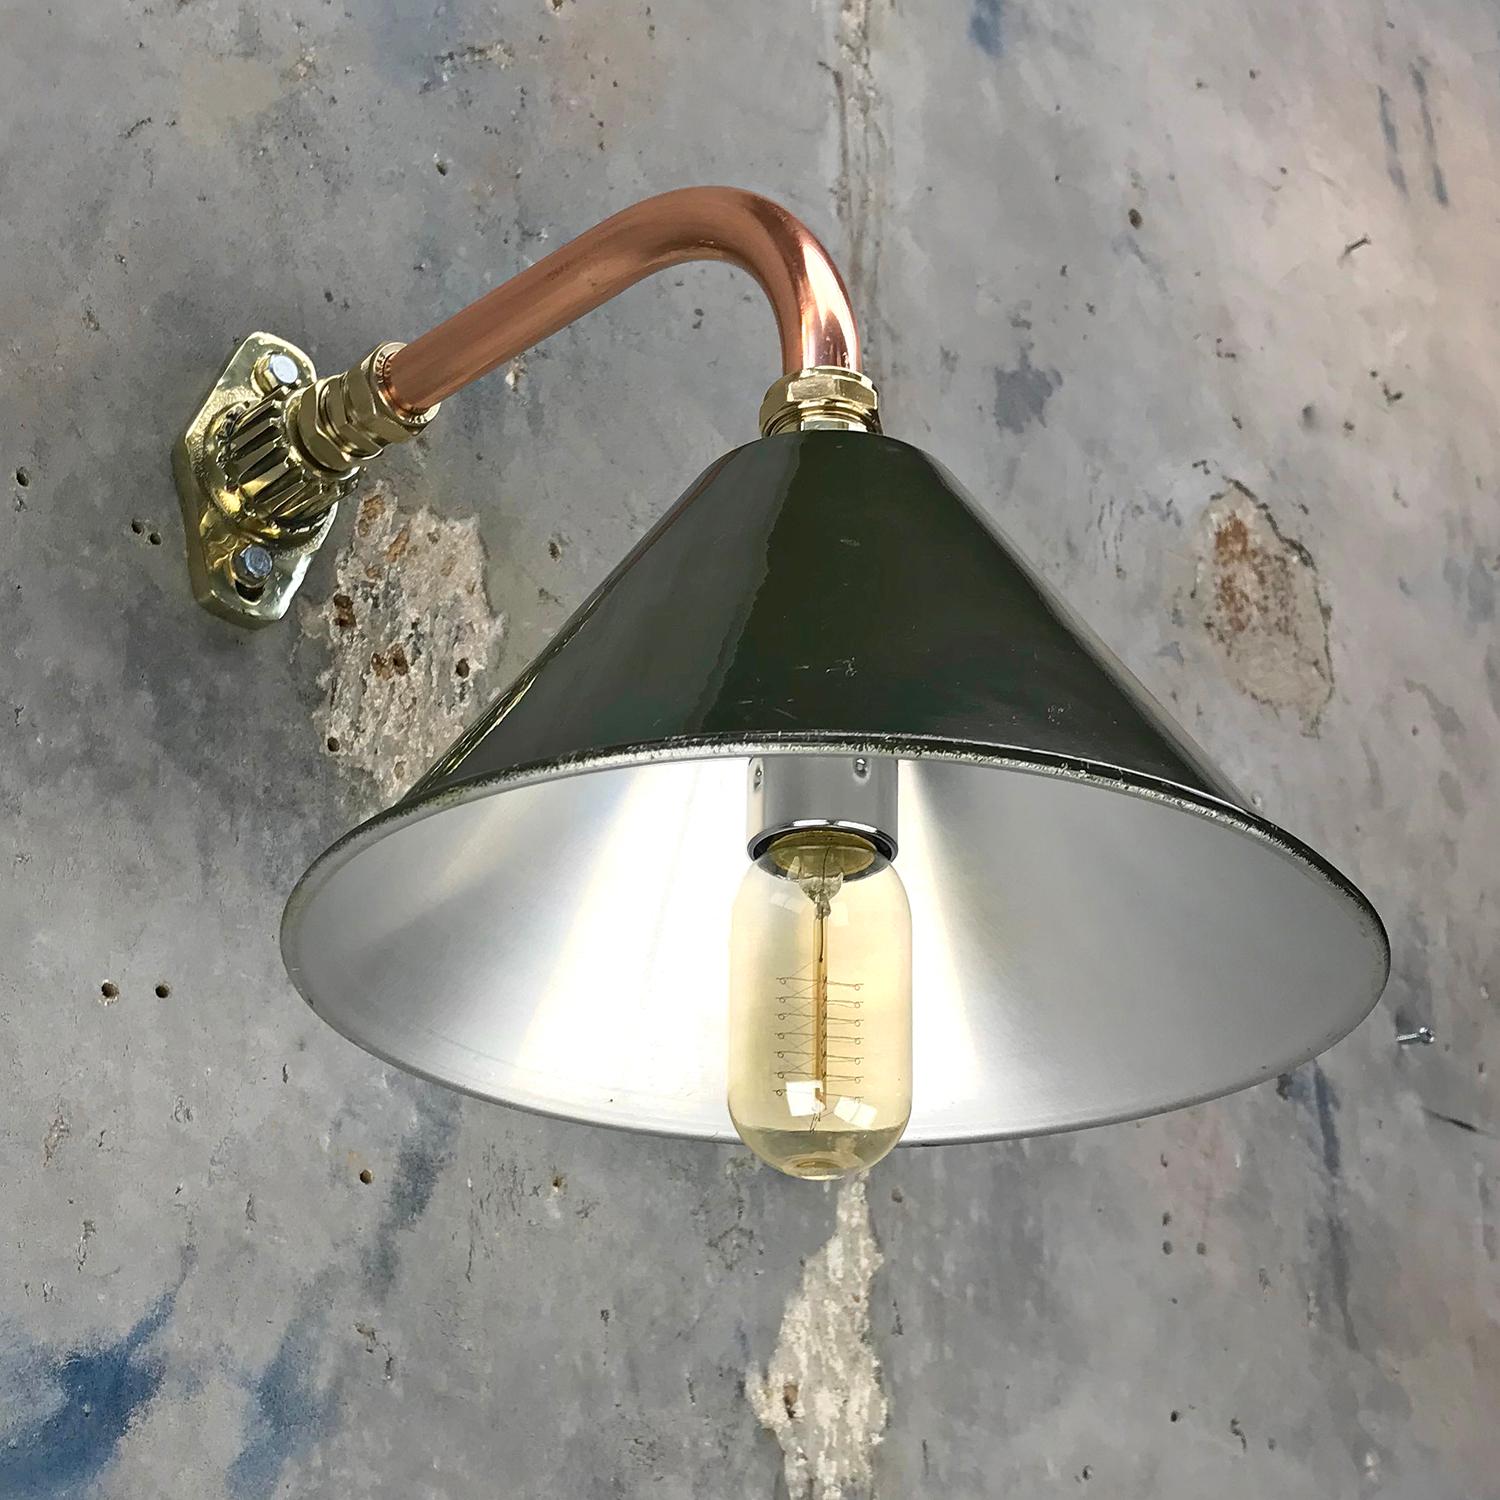 1980s Ex British Army Light Shade / Copper and Brass Cantilever, Original Green For Sale 6